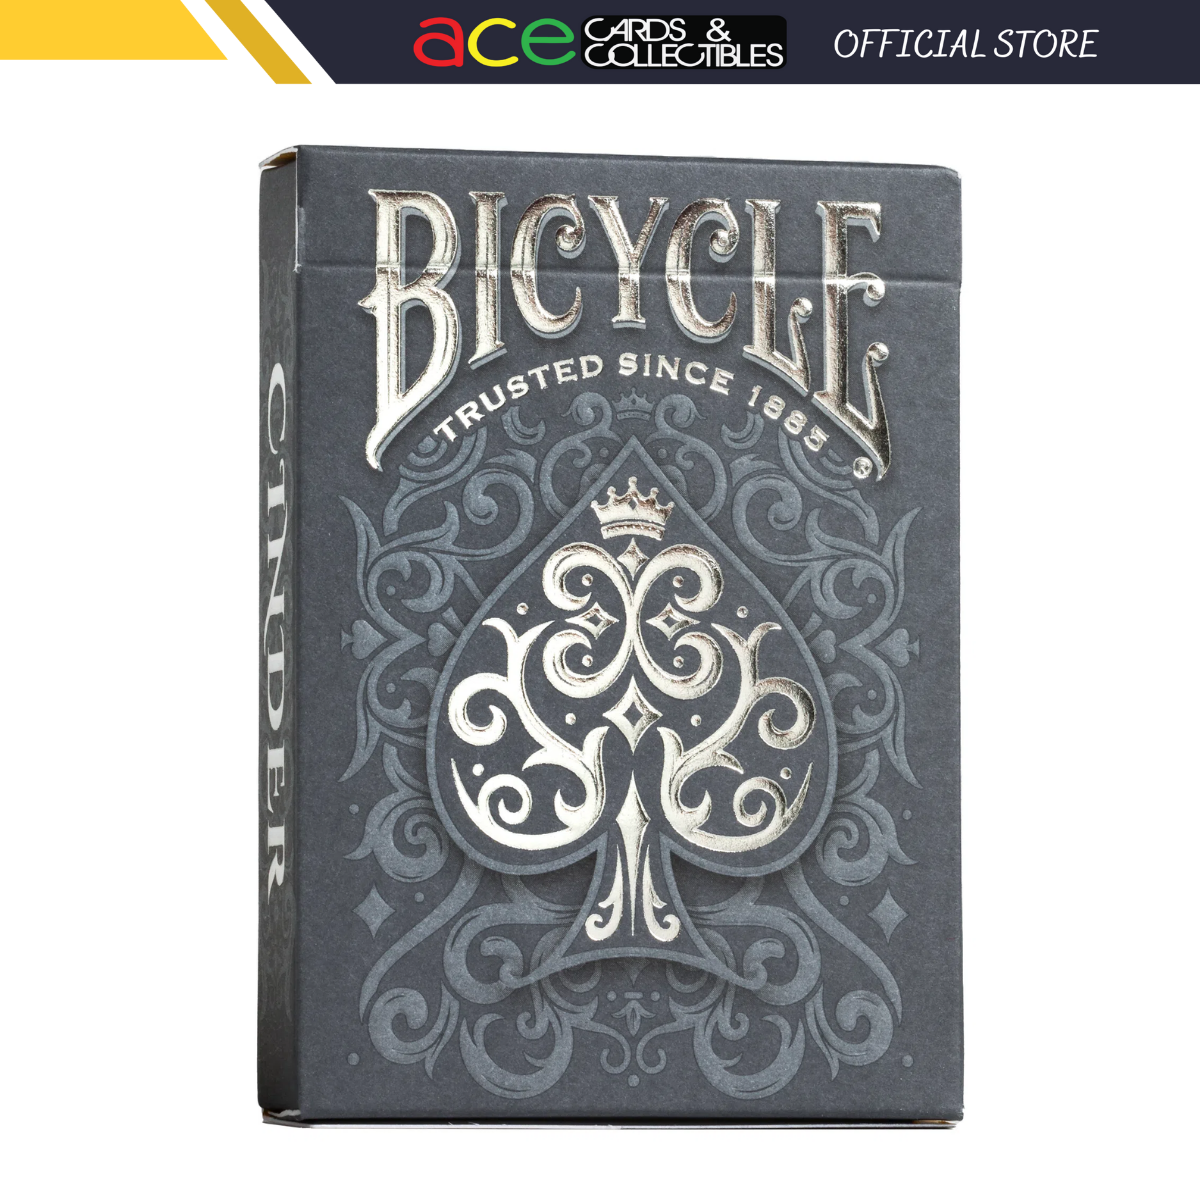 Bicycle Cinder Playing Cards-United States Playing Cards Company-Ace Cards & Collectibles